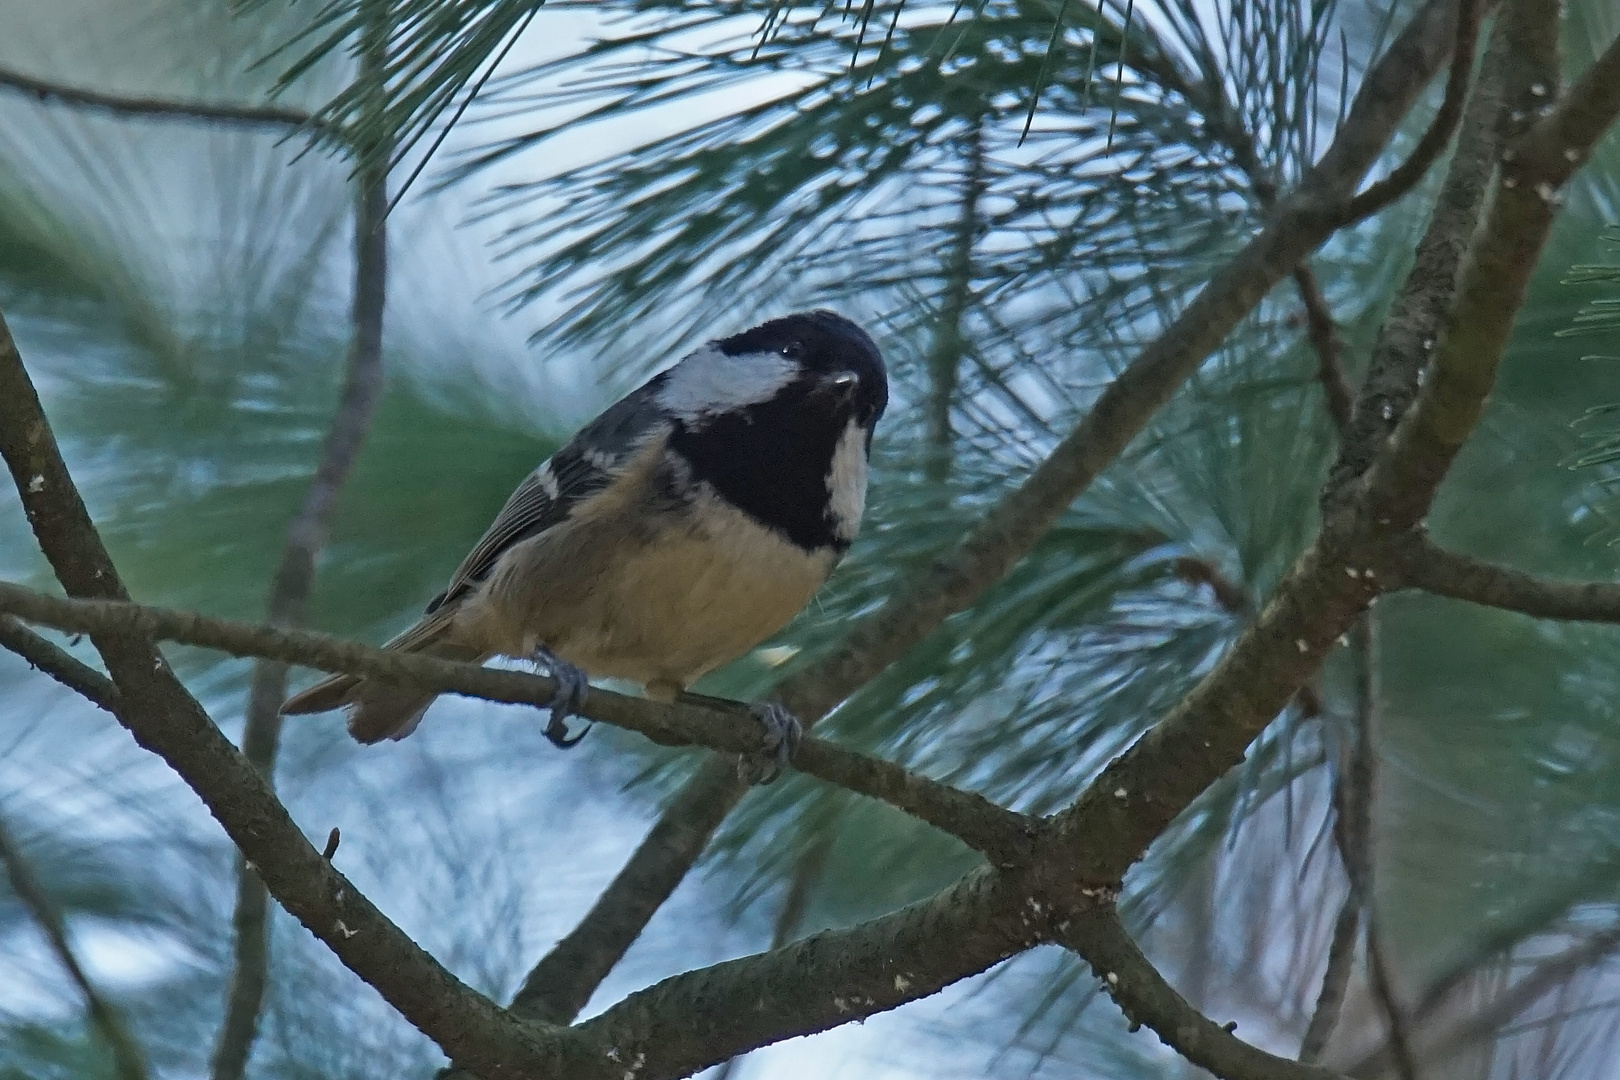 Tannenmeise (Periparus ater)